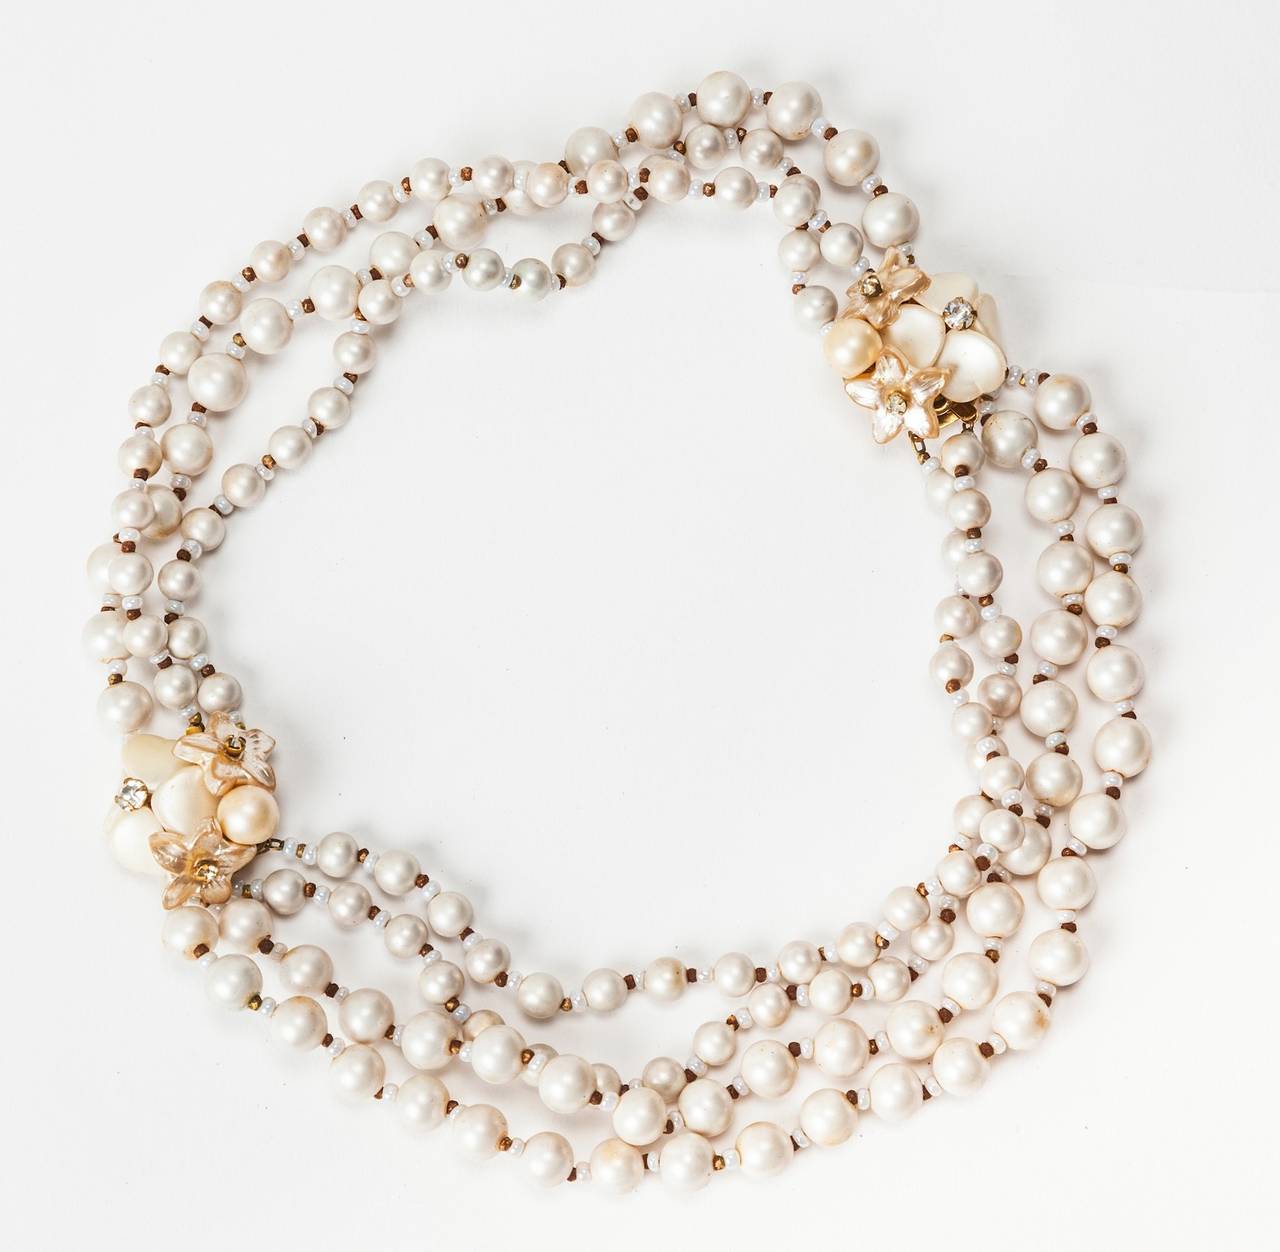 Miriam Haskell's signature freshwater faux pearl, diamante and gilt transformation necklace with floral clasps which can become 2 bracelets. One bracelet has 3 strands and the other has 4, all with gold seed bead spacers. 1950's USA. Perfect wedding